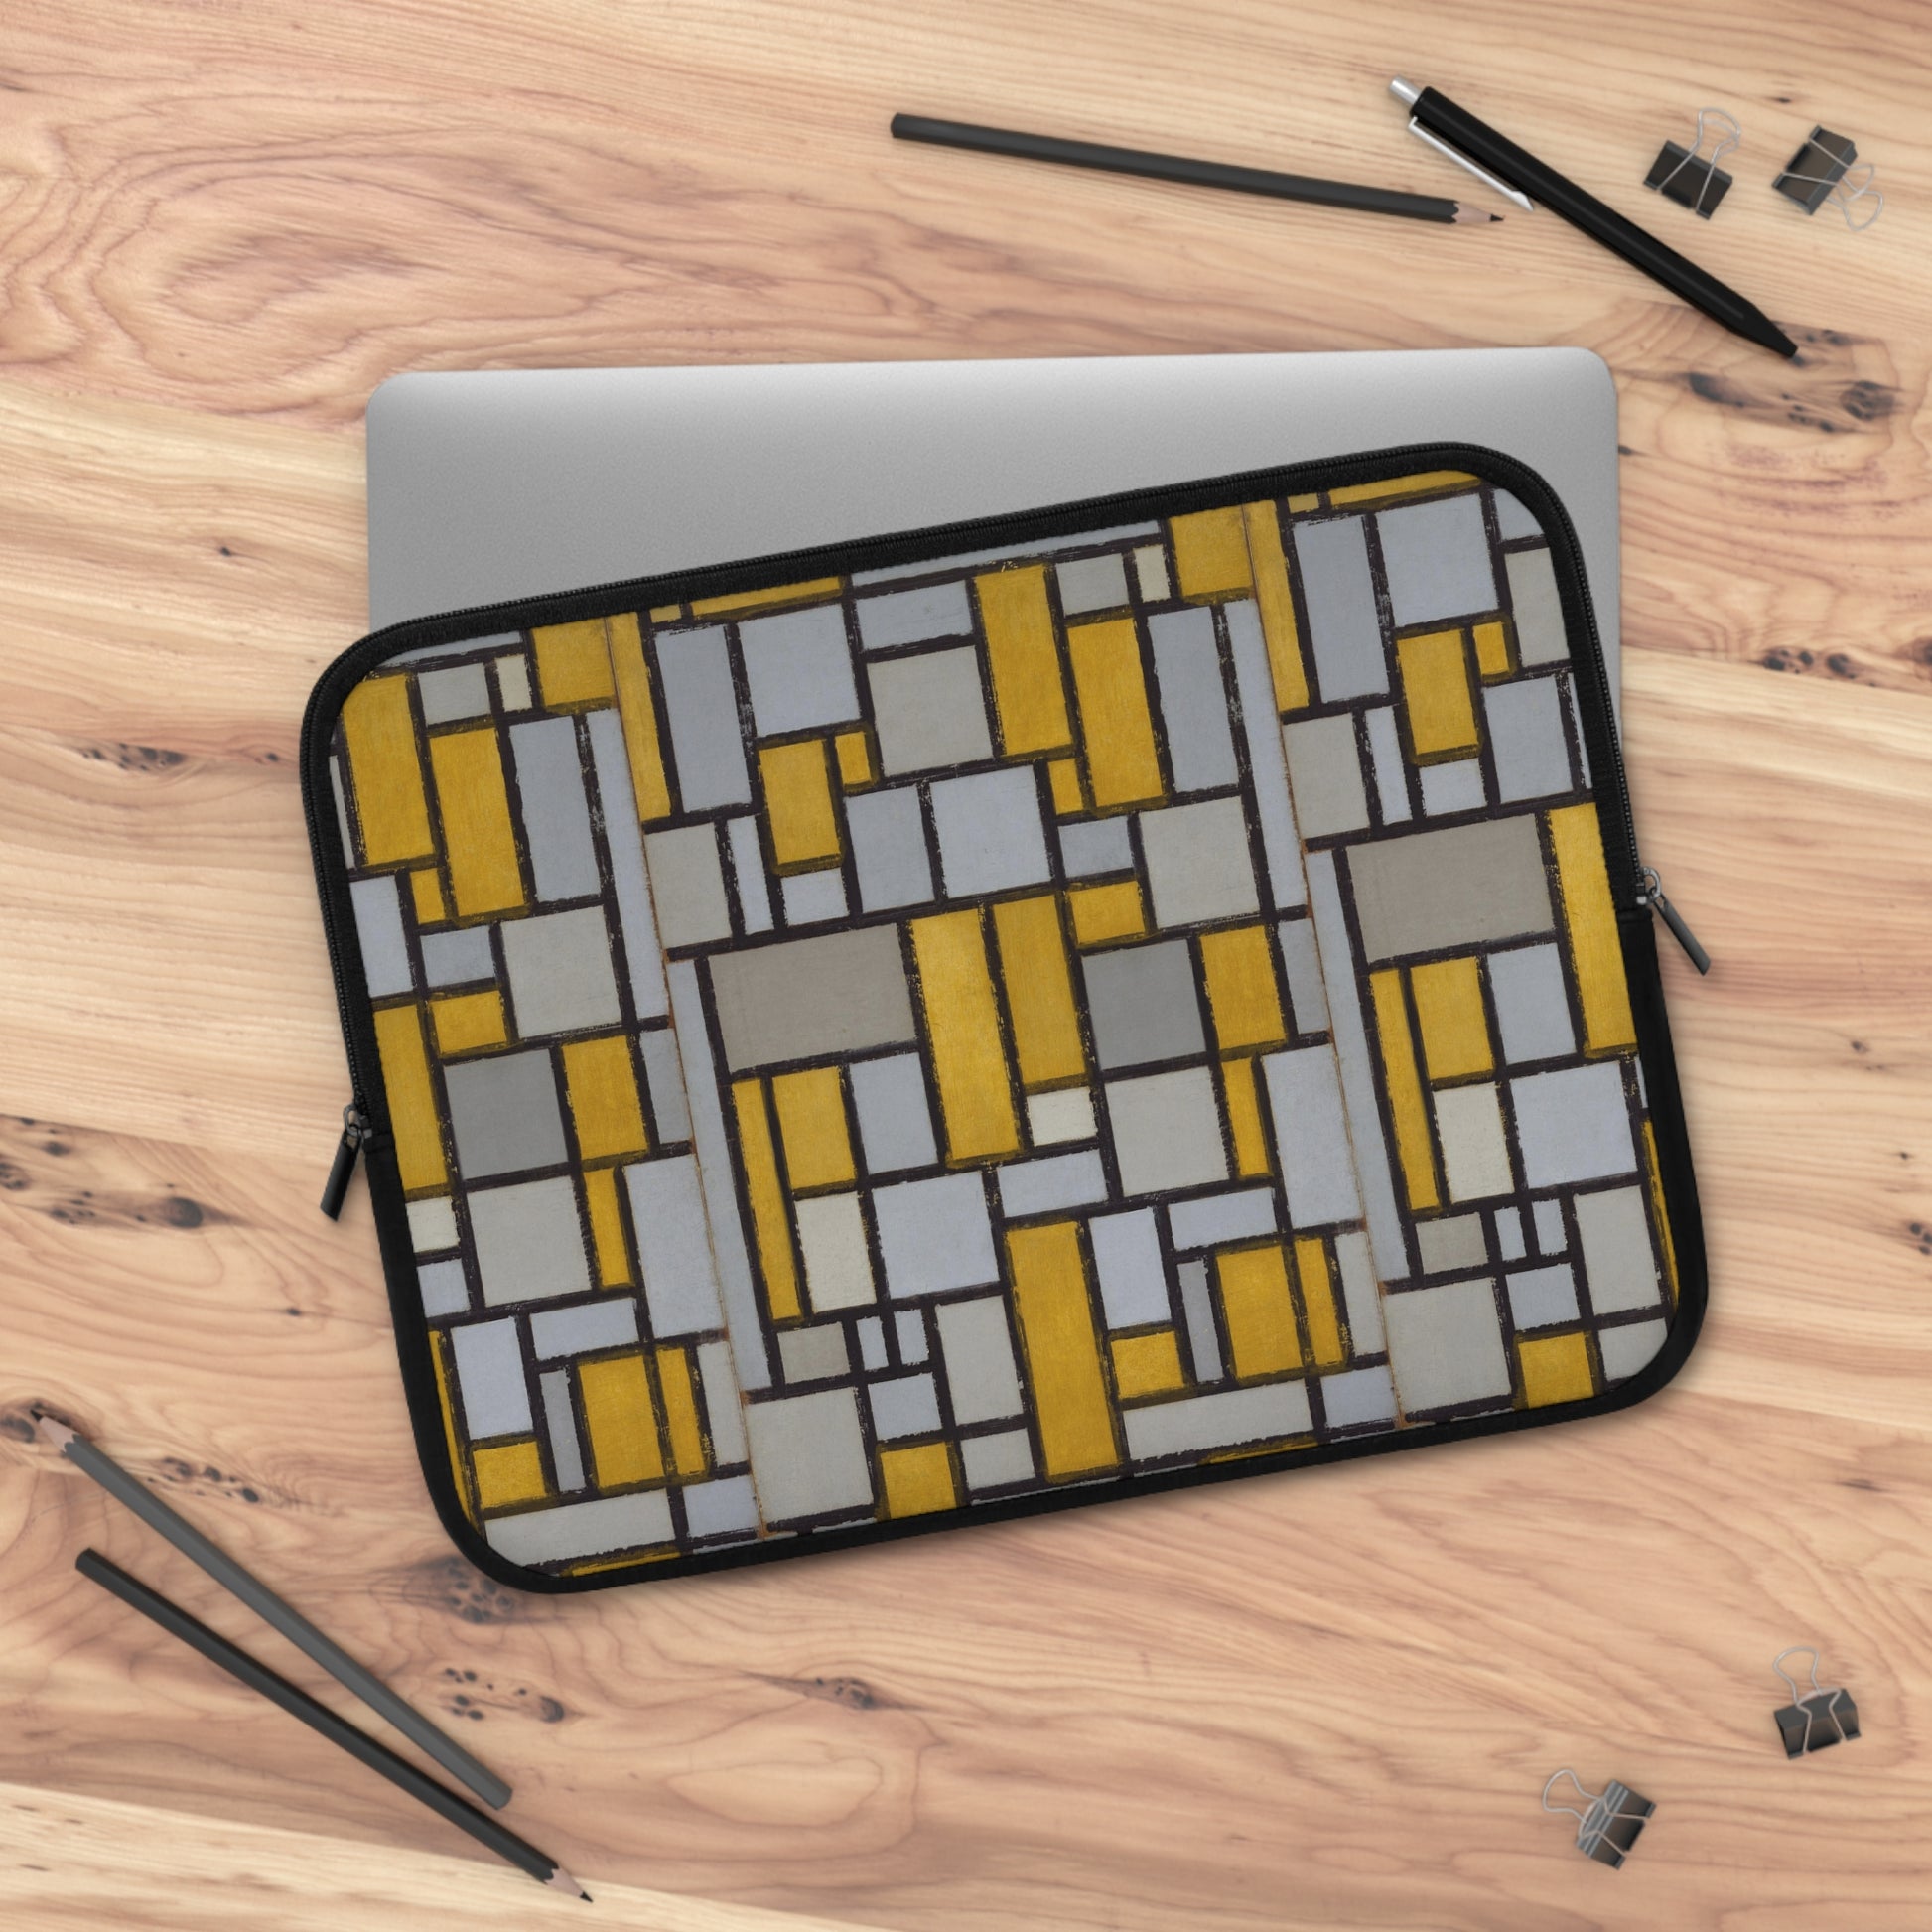 PIET MONDRIAN - COMPOSITION WITH GRID No. 1 - LAPTOP SLEEVE 